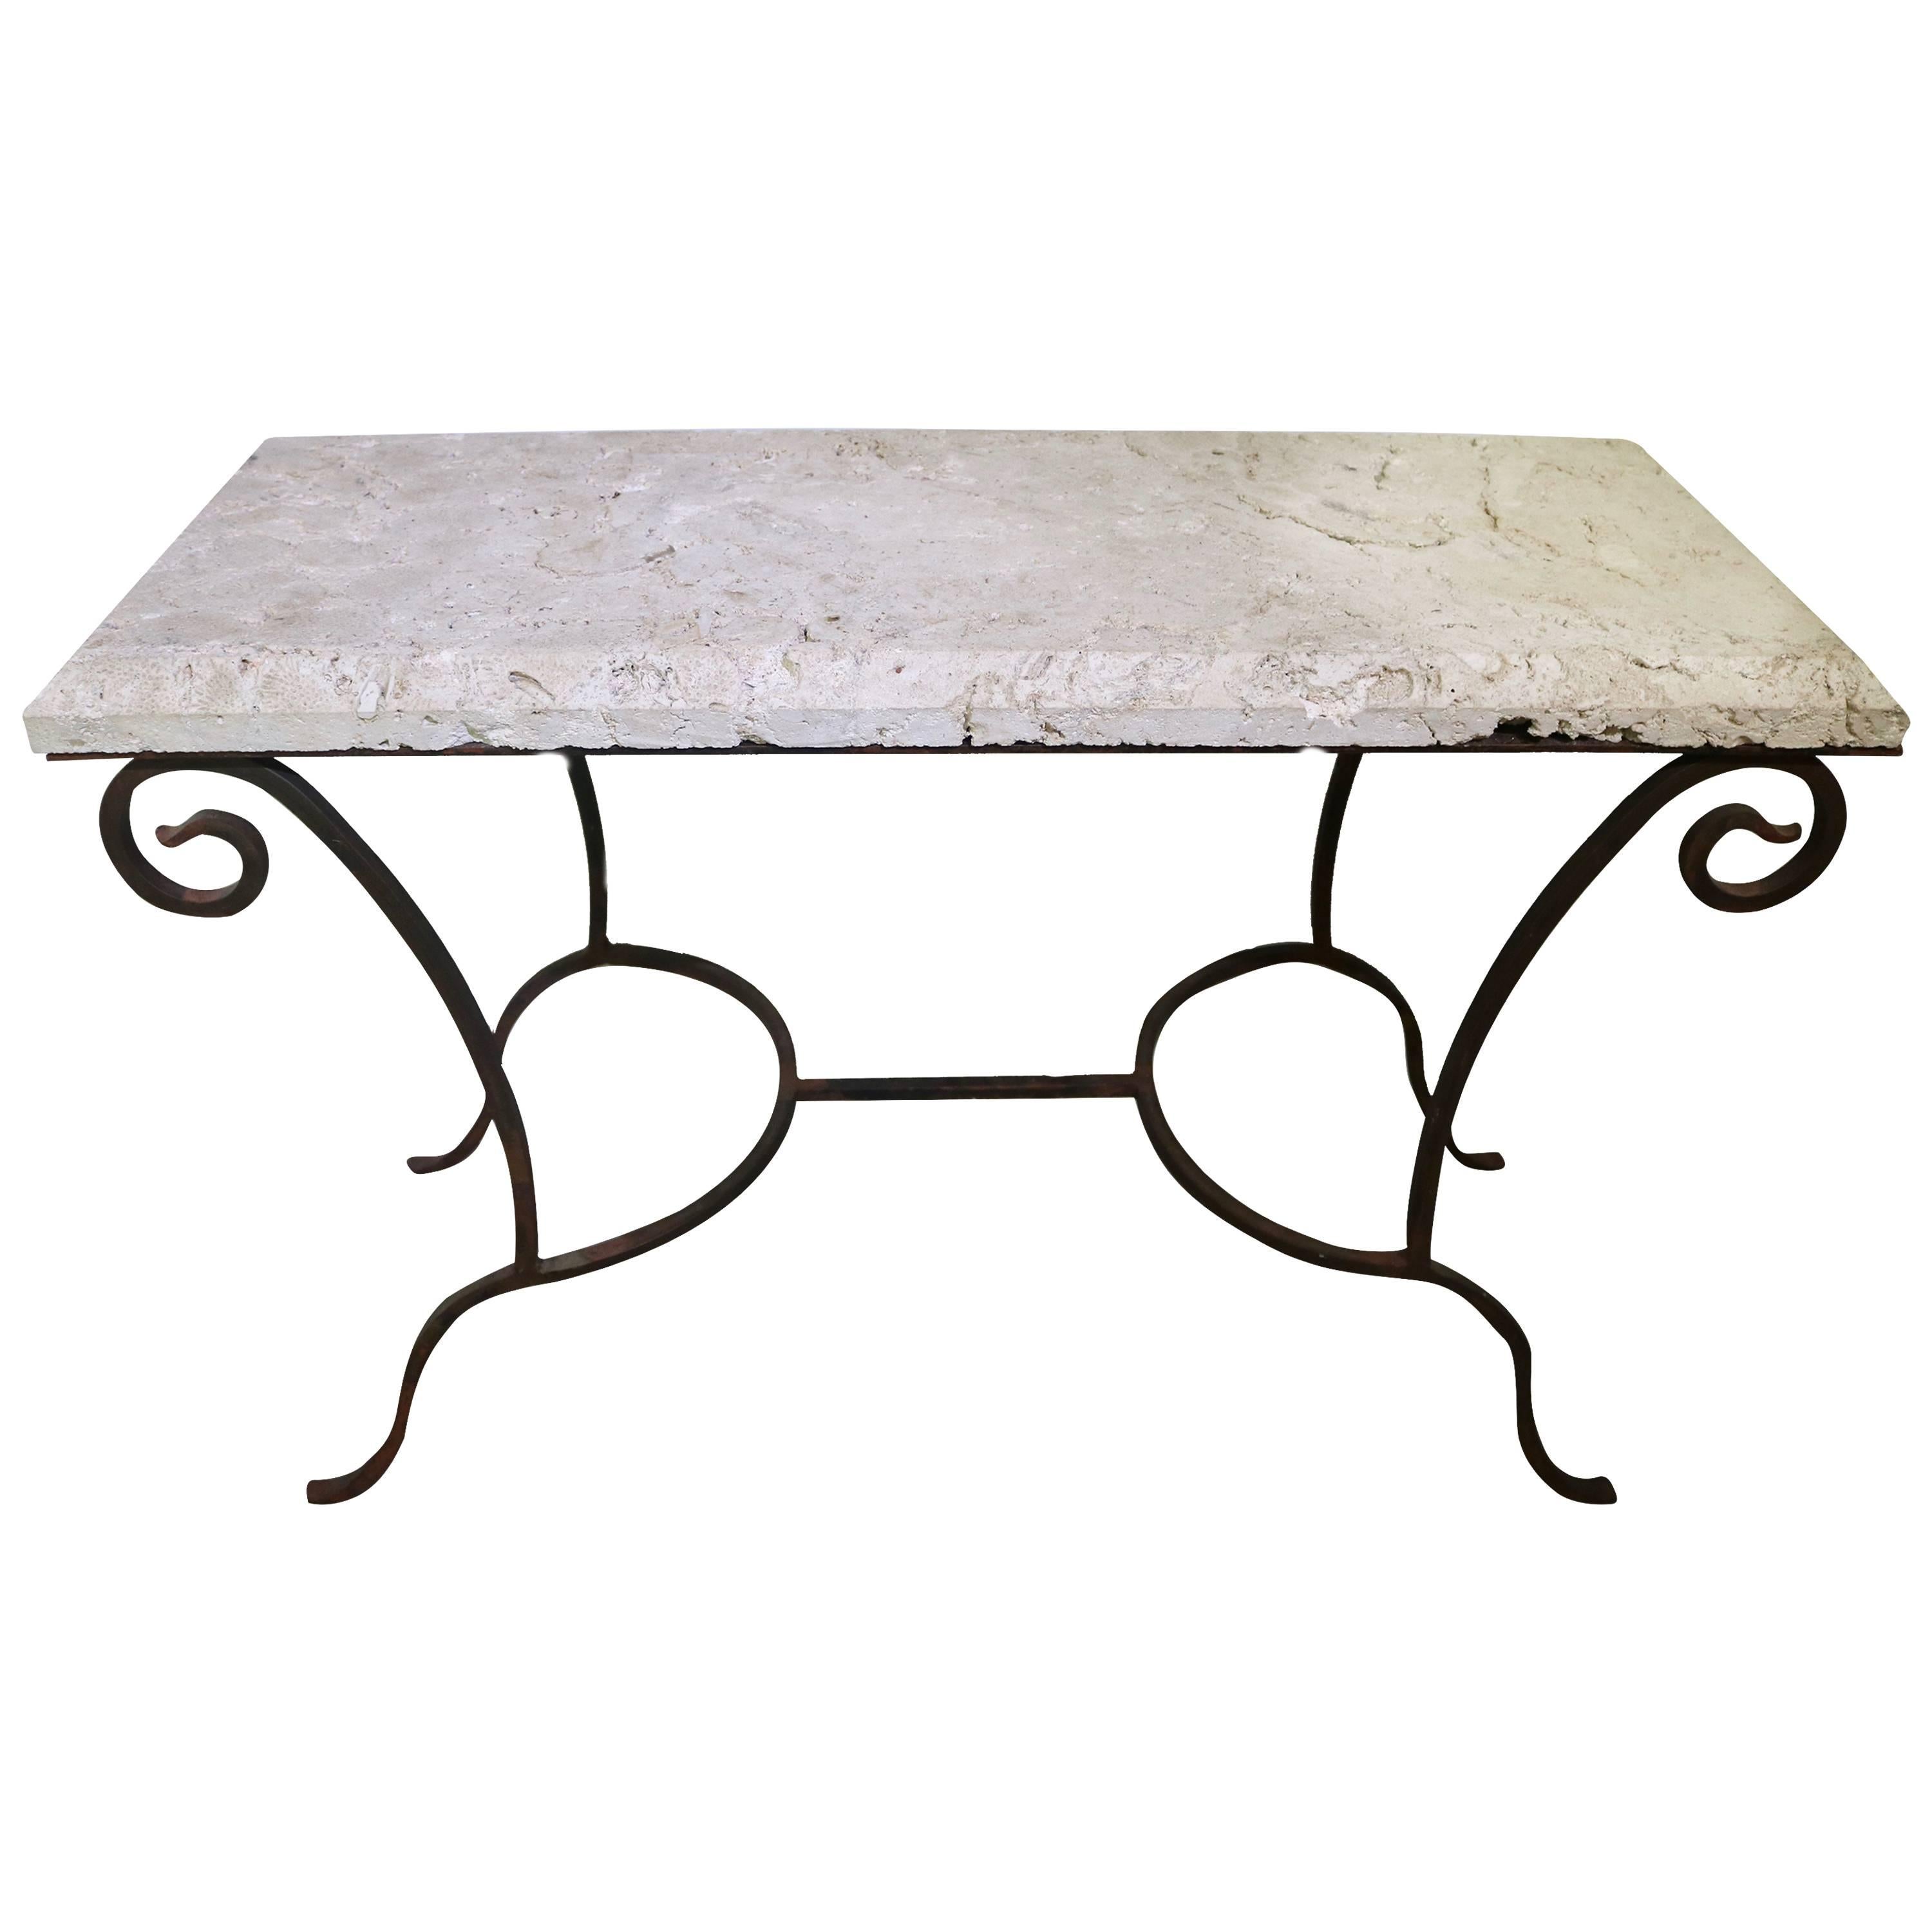 Mizner Style Rectangular Console Table in Wrought Iron and Coquina Stone